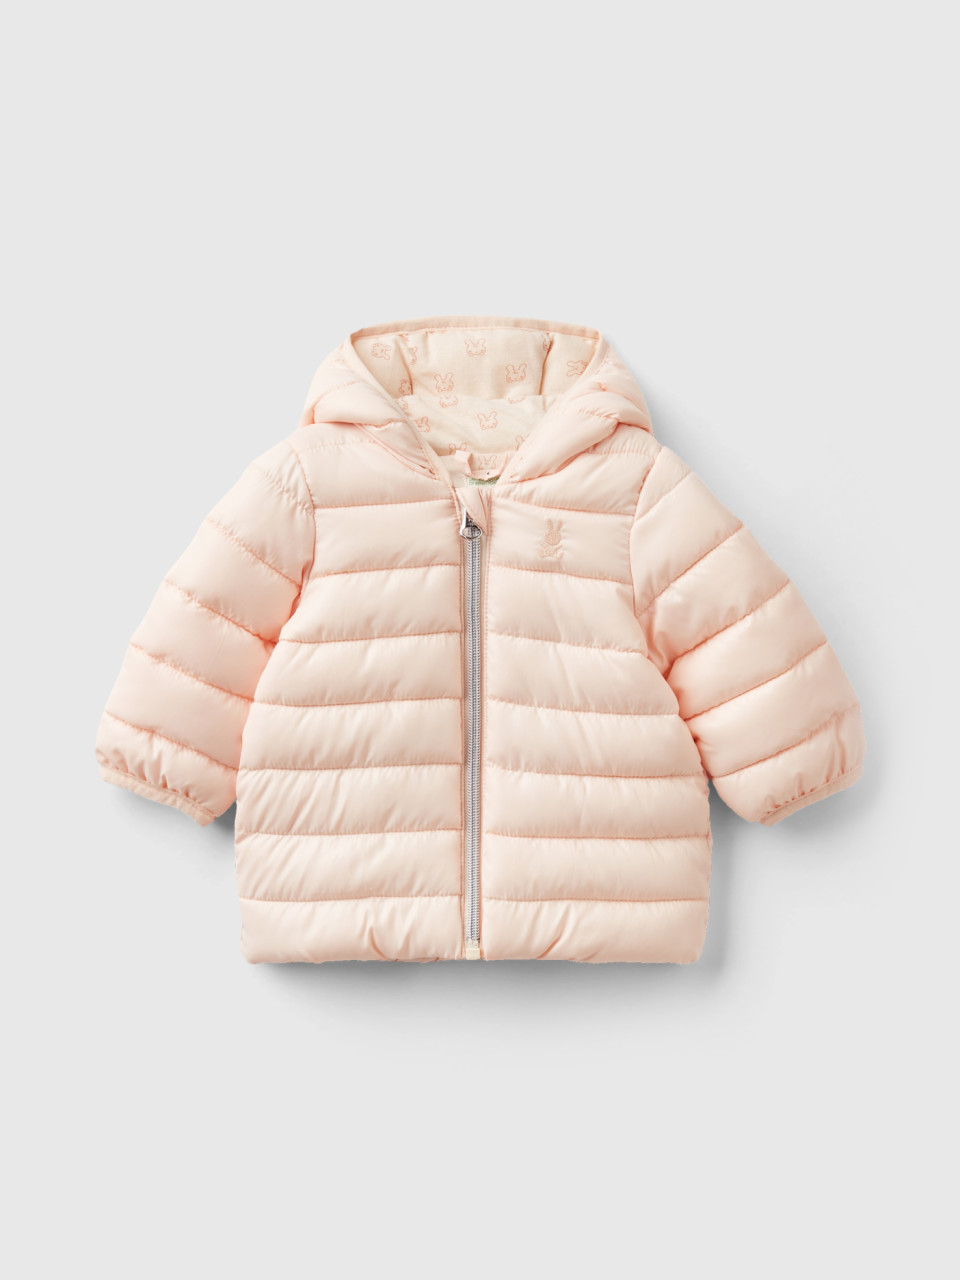 Benetton, Padded Jacket With Ears, Peach, Kids